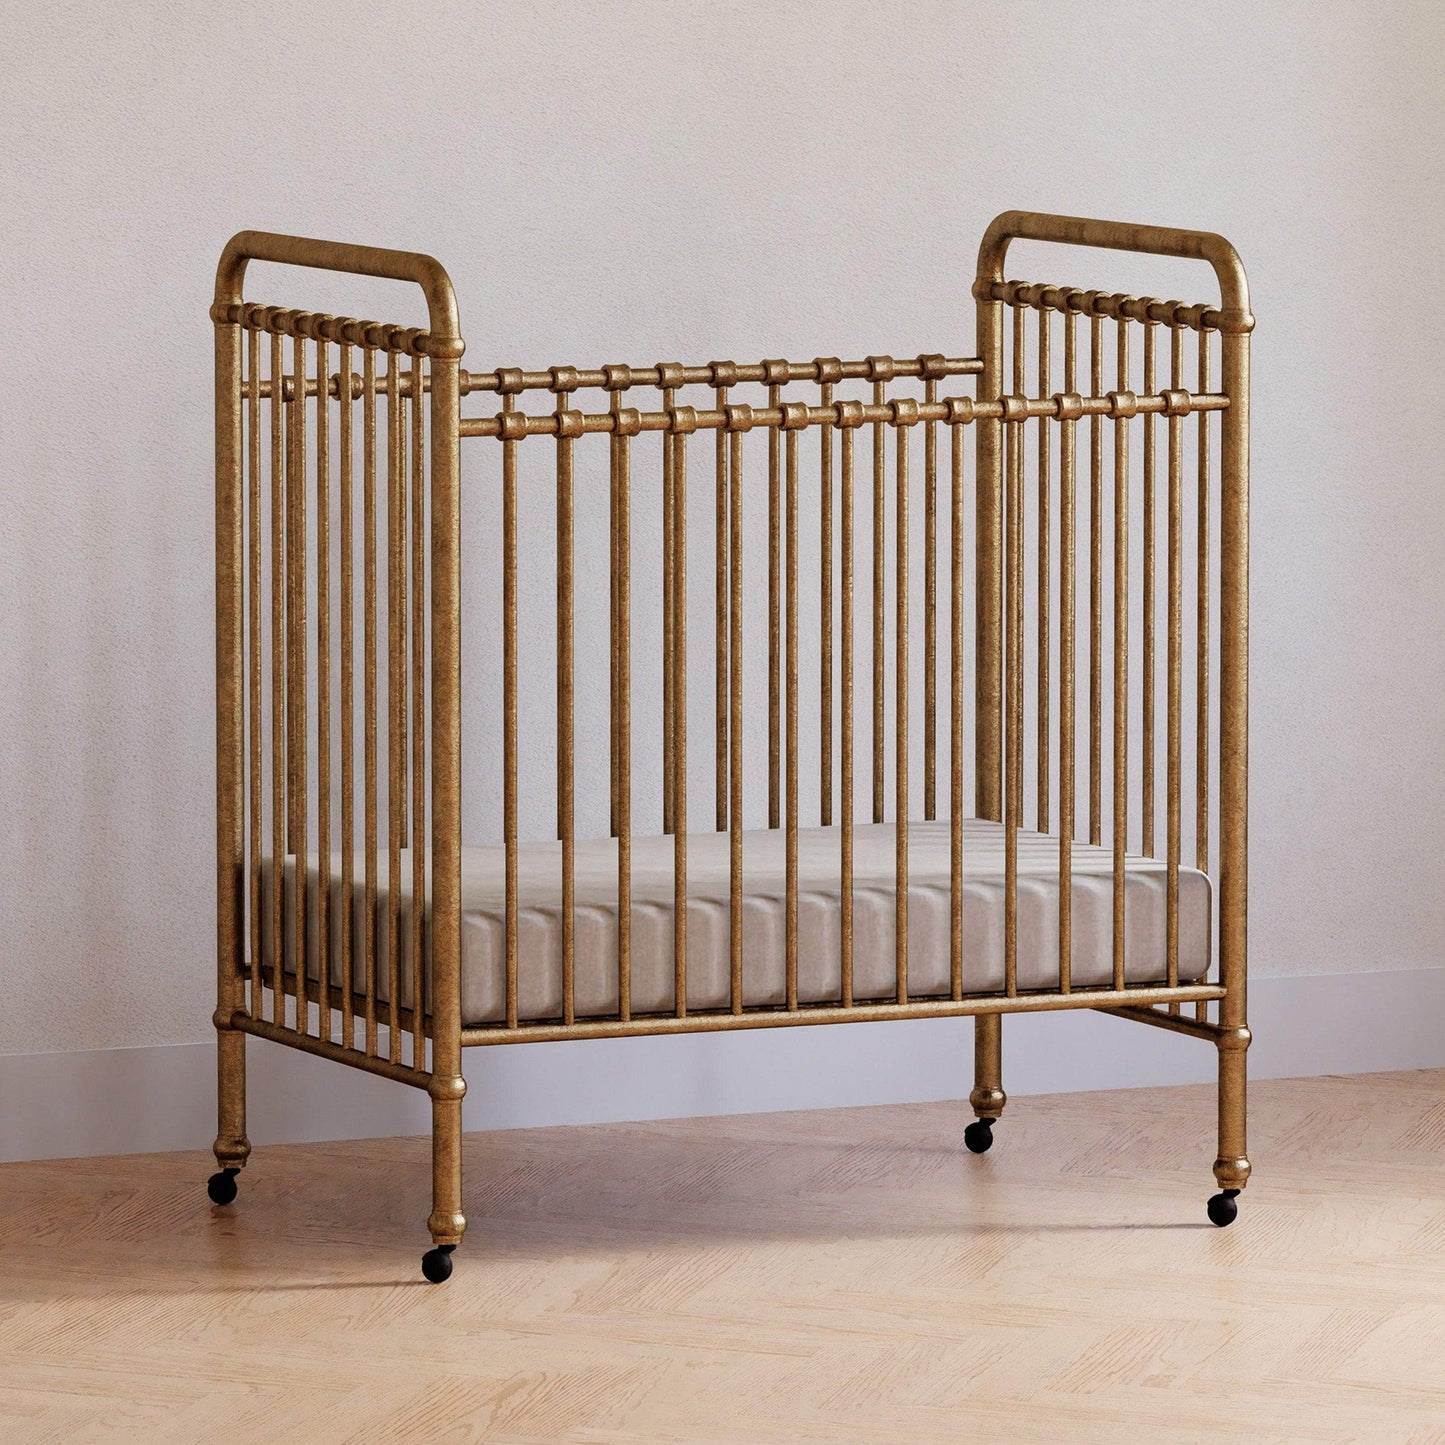 M15598VG,Abigail 3-in-1 Convertible Mini Crib in Vintage Gold